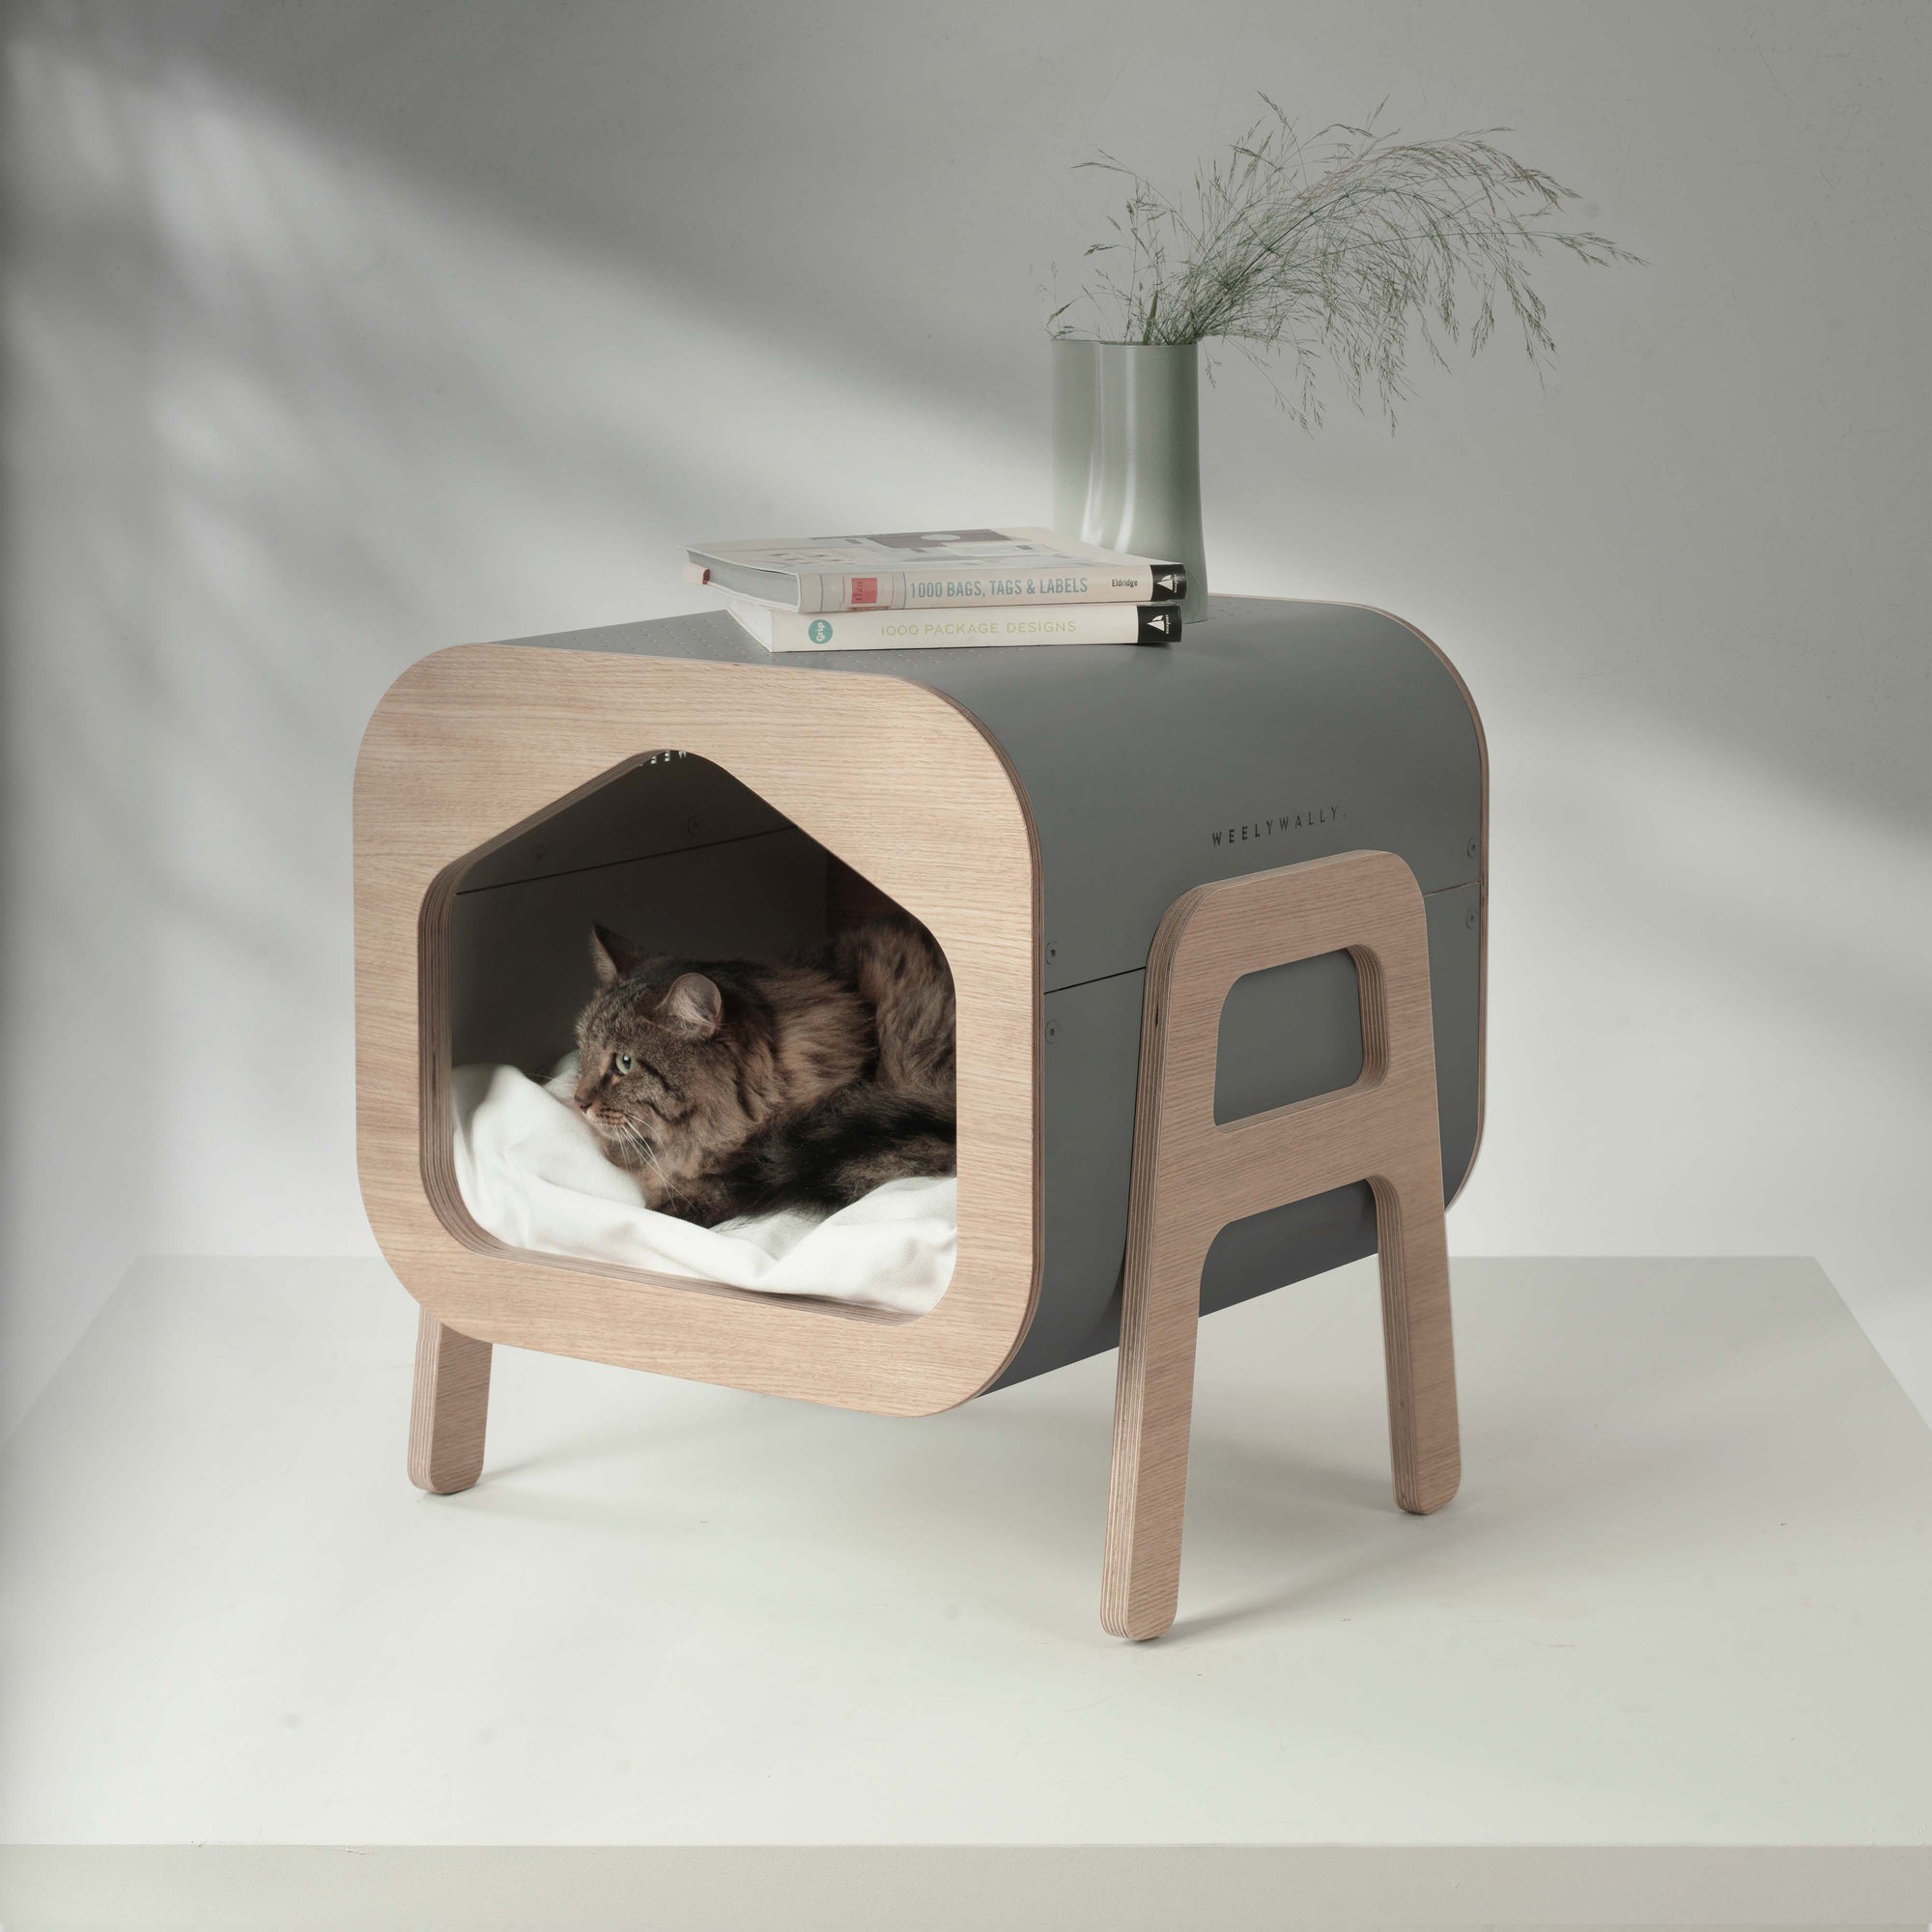 Raised cat house and bed for curious and playful cats!